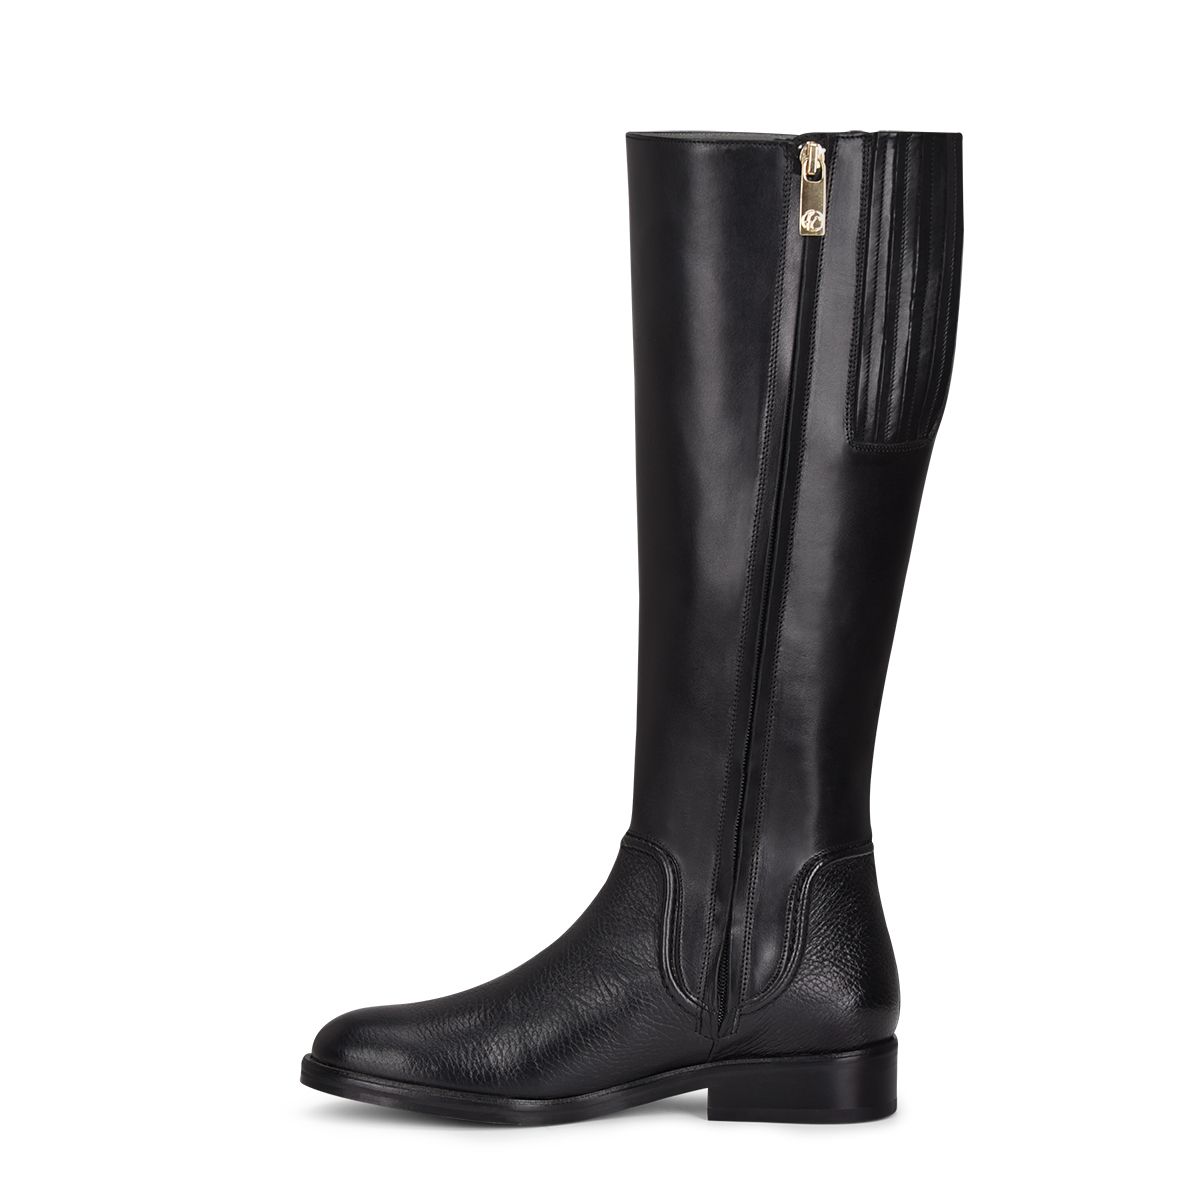 45TVNTS - Franco Cuadra black casual riding deer leather boots for women-Kuet.us